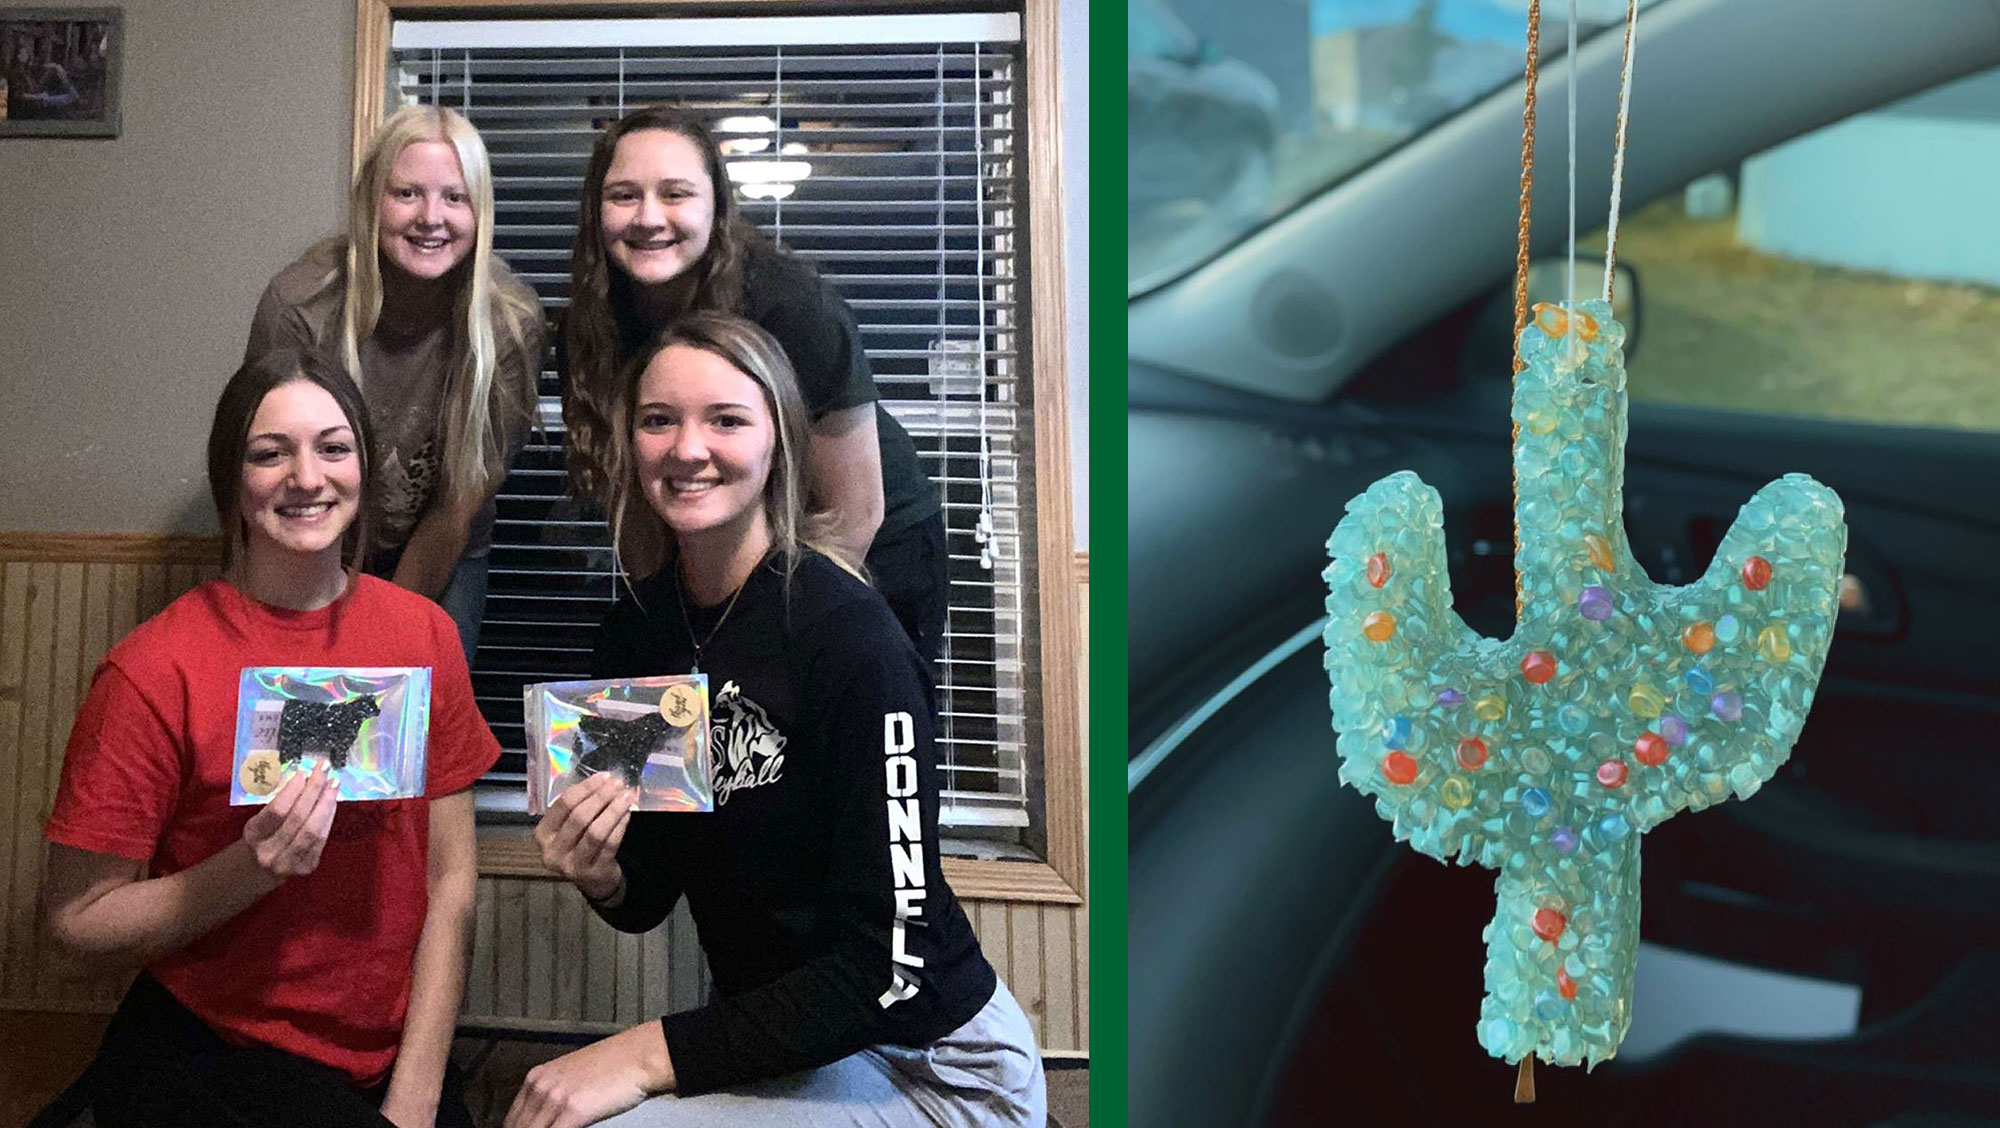 BHSU students created a small business called rustic meadows which made and sold air fresheners.